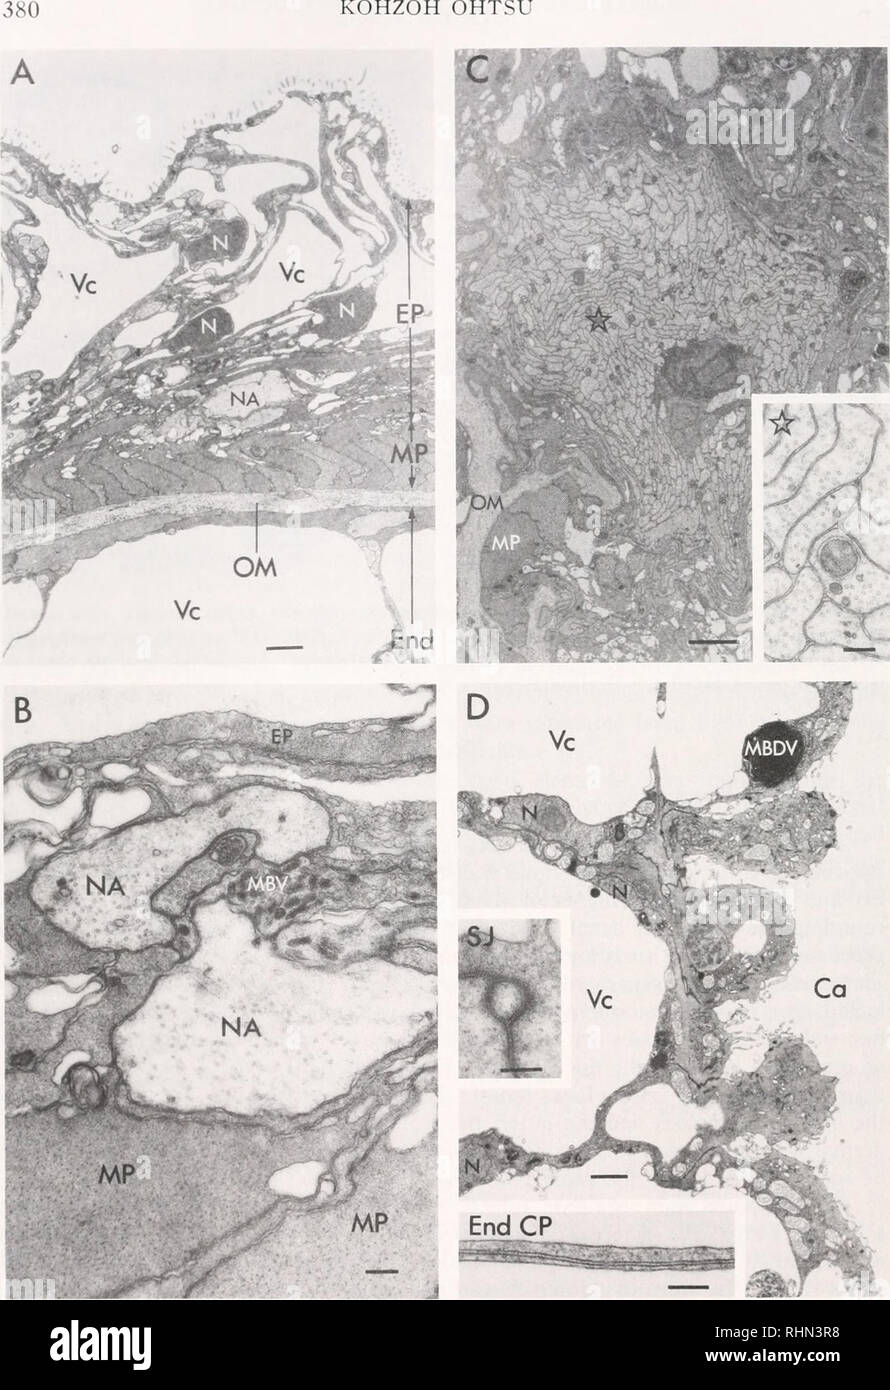 . The Biological bulletin. Biology; Zoology; Biology; Marine Biology. KOHZOH OHTSU. FIGURE 3. Electron micrographs of cross-sections through the radial streaks. A, the ectoderm and a part of the endoderm; B, high magnification of the endoderm; C, the sub- tentacular nerve bundle and high magnification of a part of it (asterisk) ; D, endodermal cells. Ca, canal; End, endoderm; End CP, fine endodermal cell process; EP, the epithelial process of the myoepithelial cell; MBV, membrane bound vesicle; MBDV, membrane bound digestive. Please note that these images are extracted from scanned page images Stock Photo